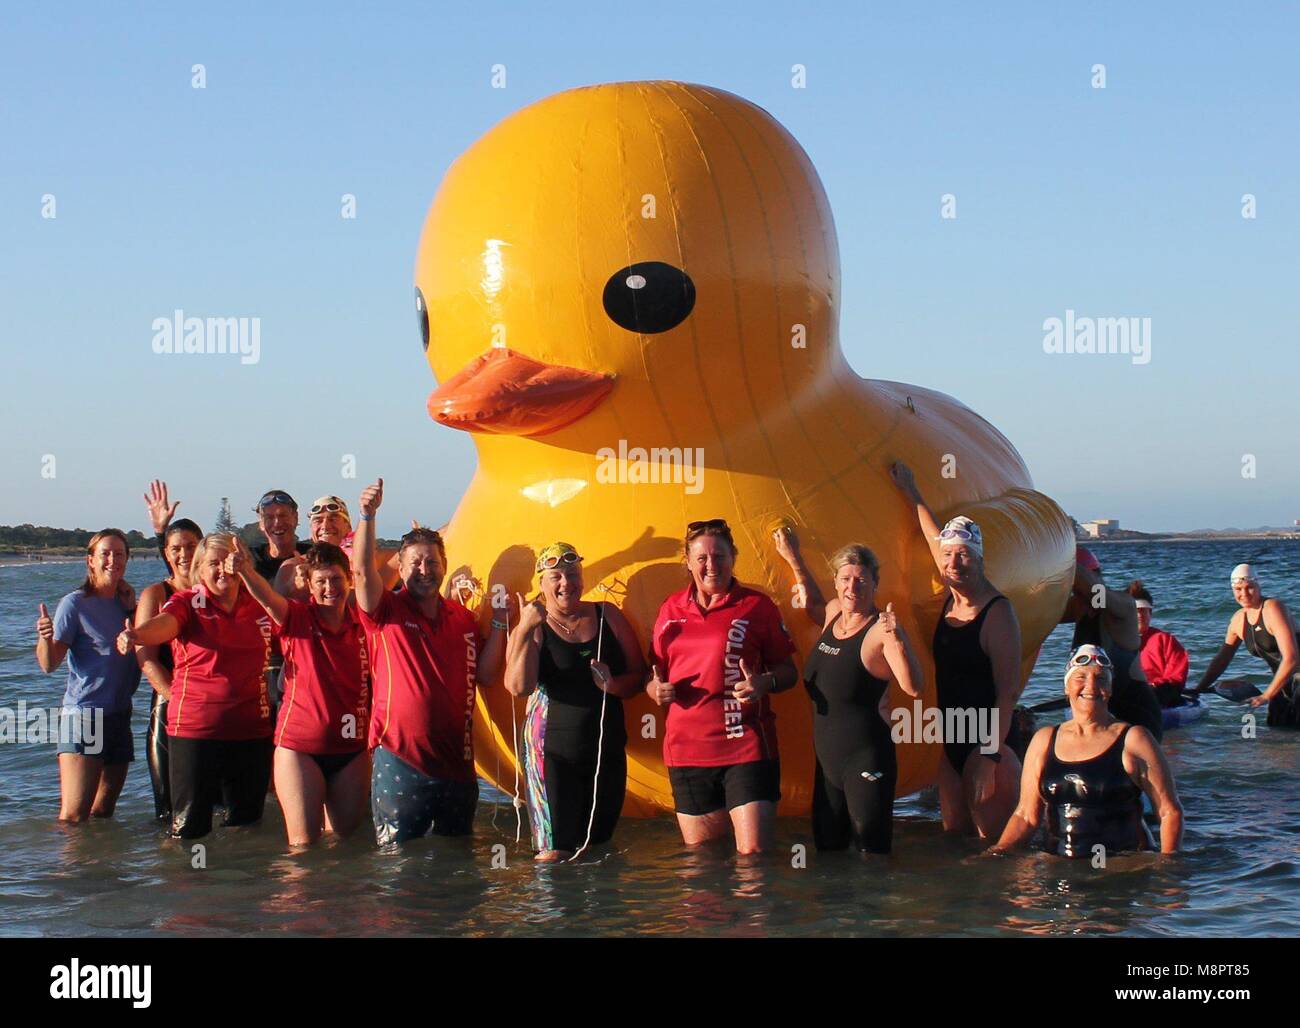 HANDOUT - 27 February 2018, Australia, Coogee Beach: Members are gathered around the duck Daphne, the mascot of the Australian Cockburn Masters Swimming Club. After a week on the high seas the giant yellow squeaking duck reappeared before Australia. The inflatable animal was discovered by a fisherman more than 30 kilometres before the West ccoast as it became known on 19 March 2018. Photo: Nick Wyatt/Cockburn Masters Swimming Club /dpa - ATTENTION: editorial use only in connection with the latest coverage about (the transmission/the film/the auction/the exhibition/the book) and only i Stock Photo